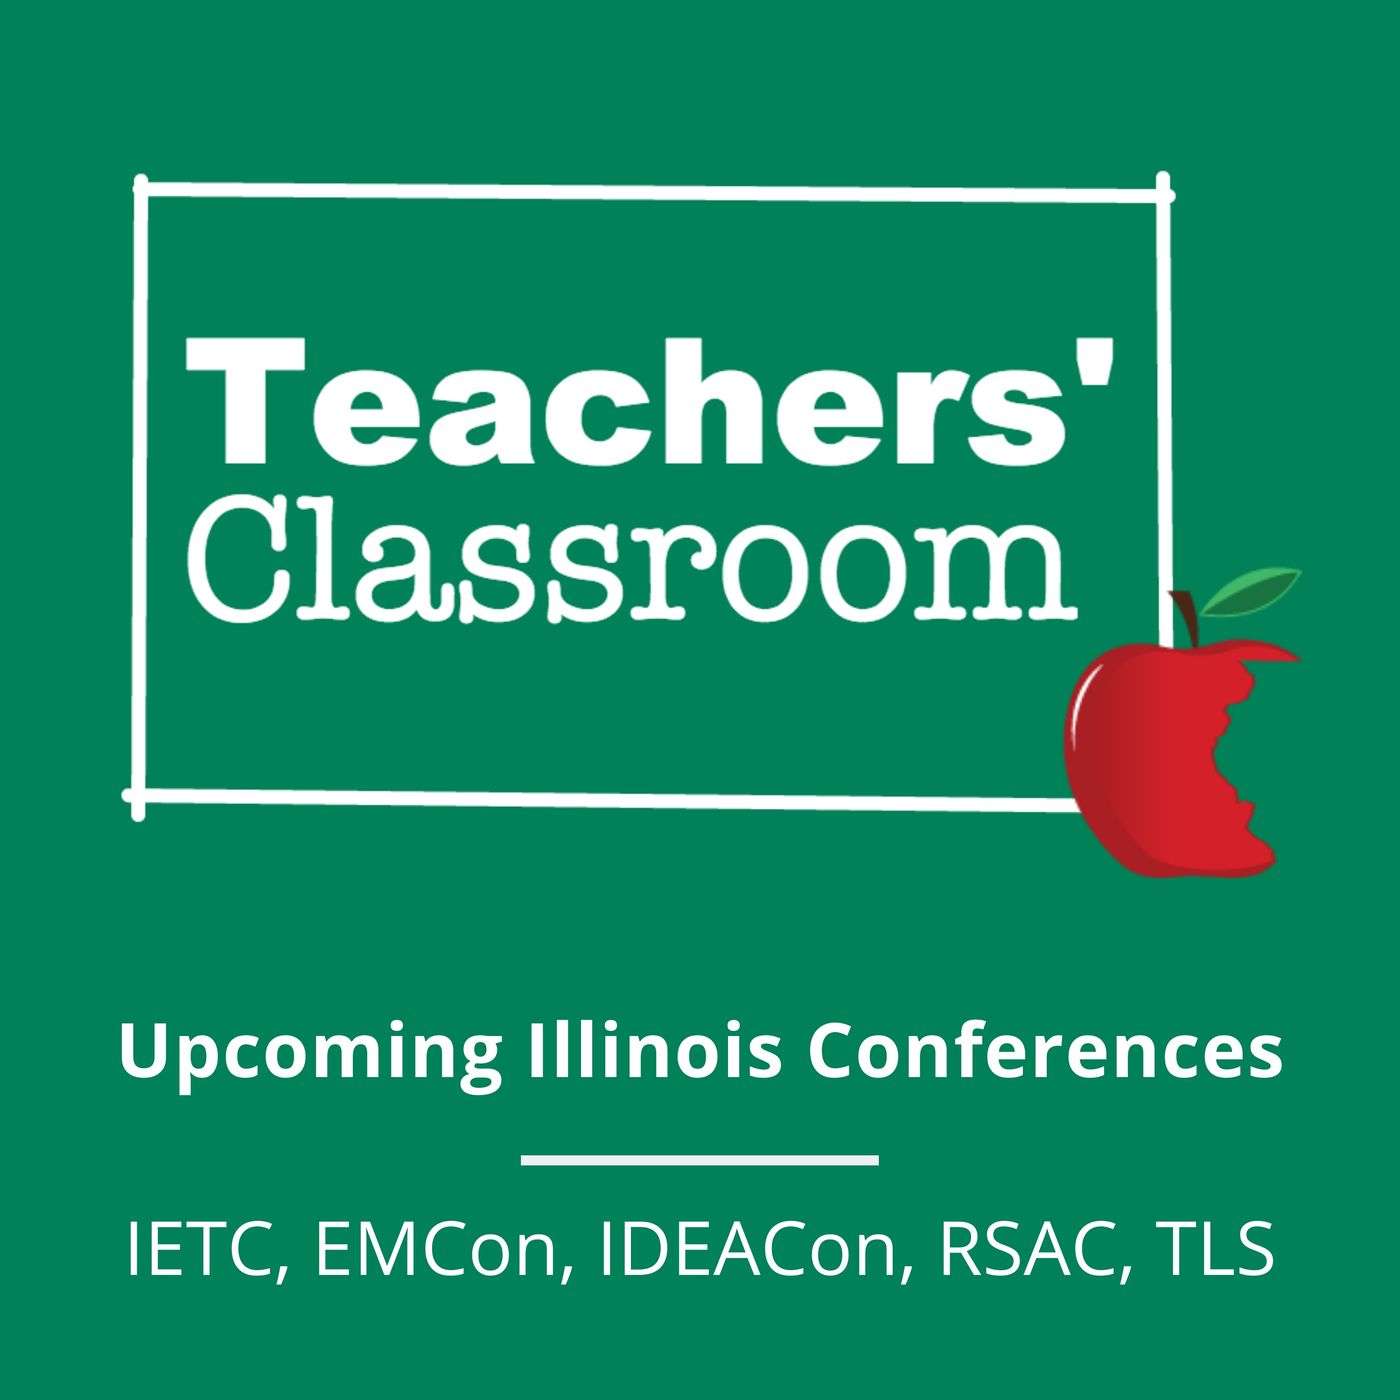 Upcoming Illinois Conferences You Need to Know About